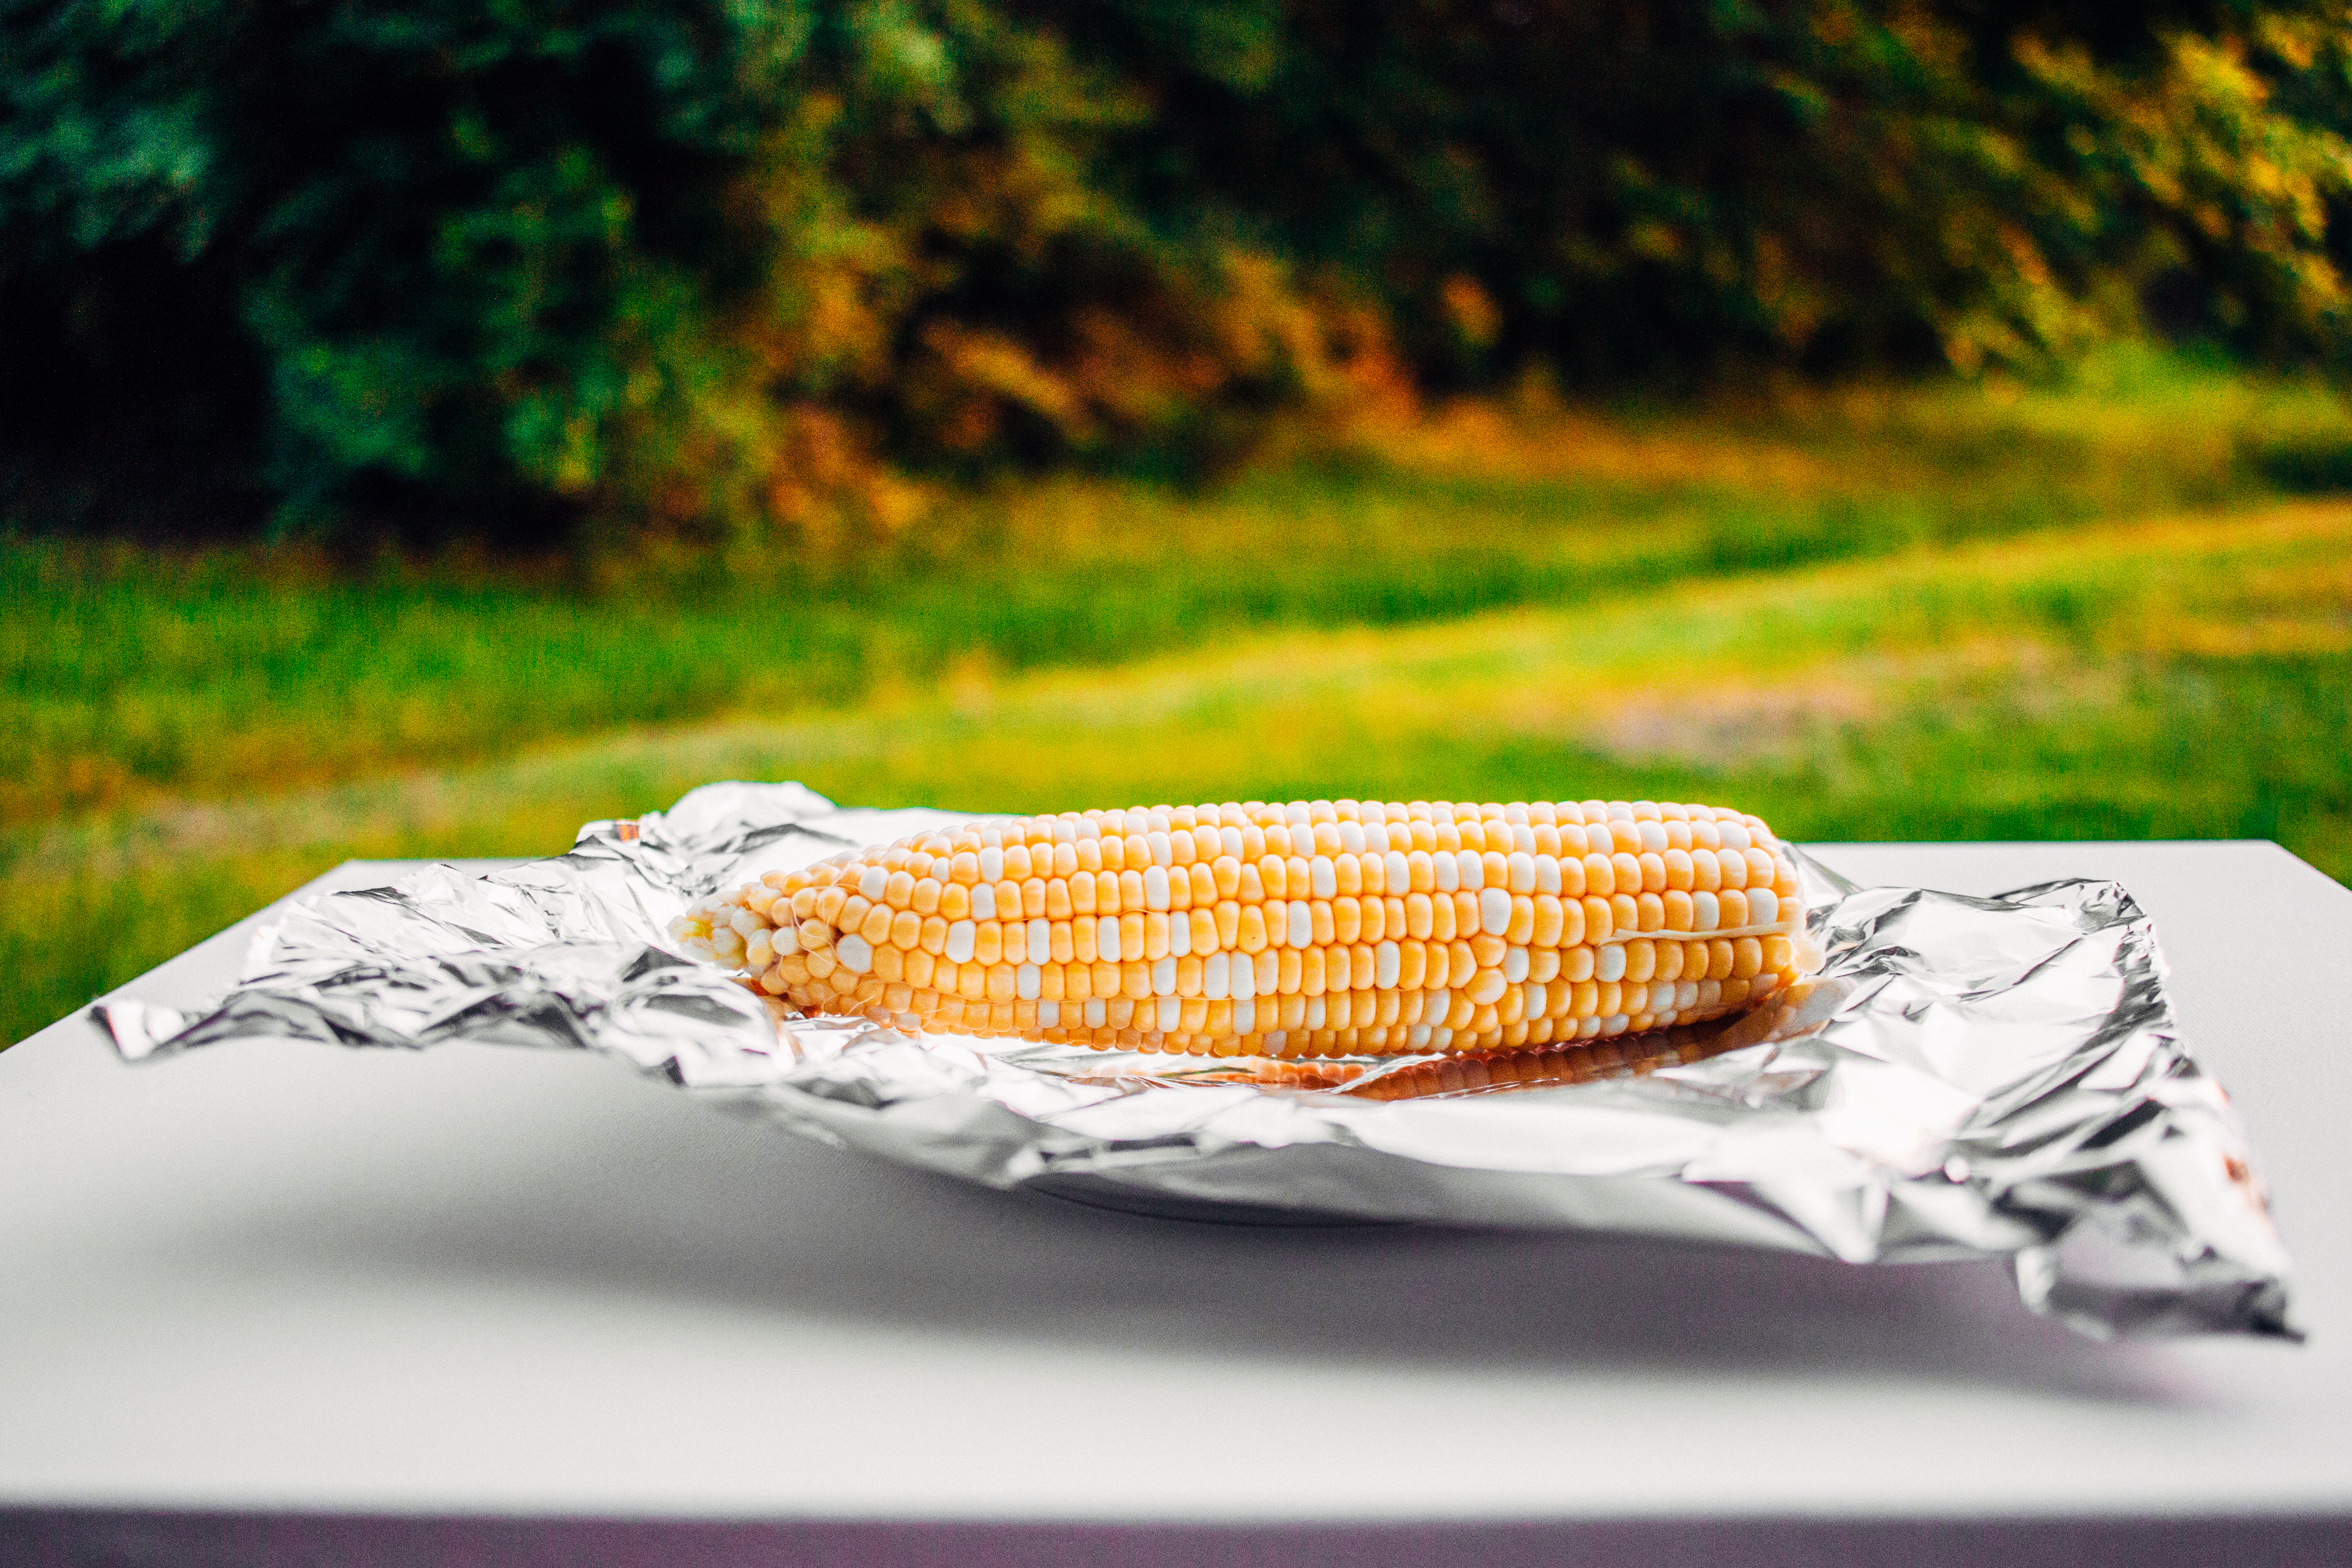 Corn on the cob sitting on a sheet of foil on a table outside.